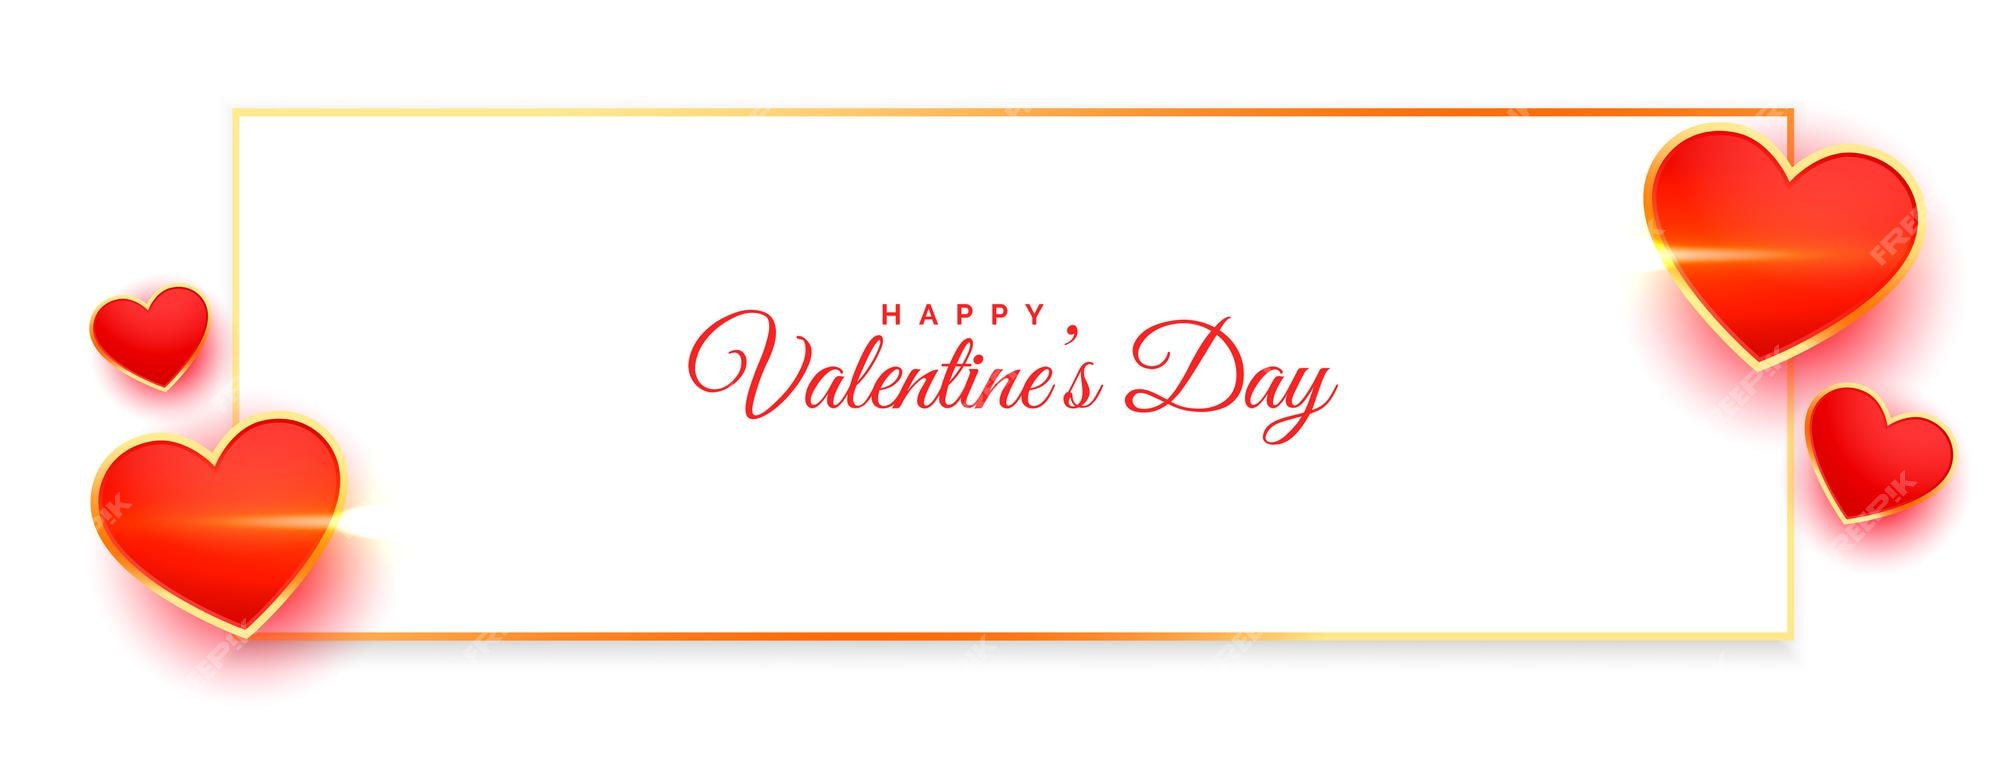 Free Vector | Valentines day wishes banner with hearts frame